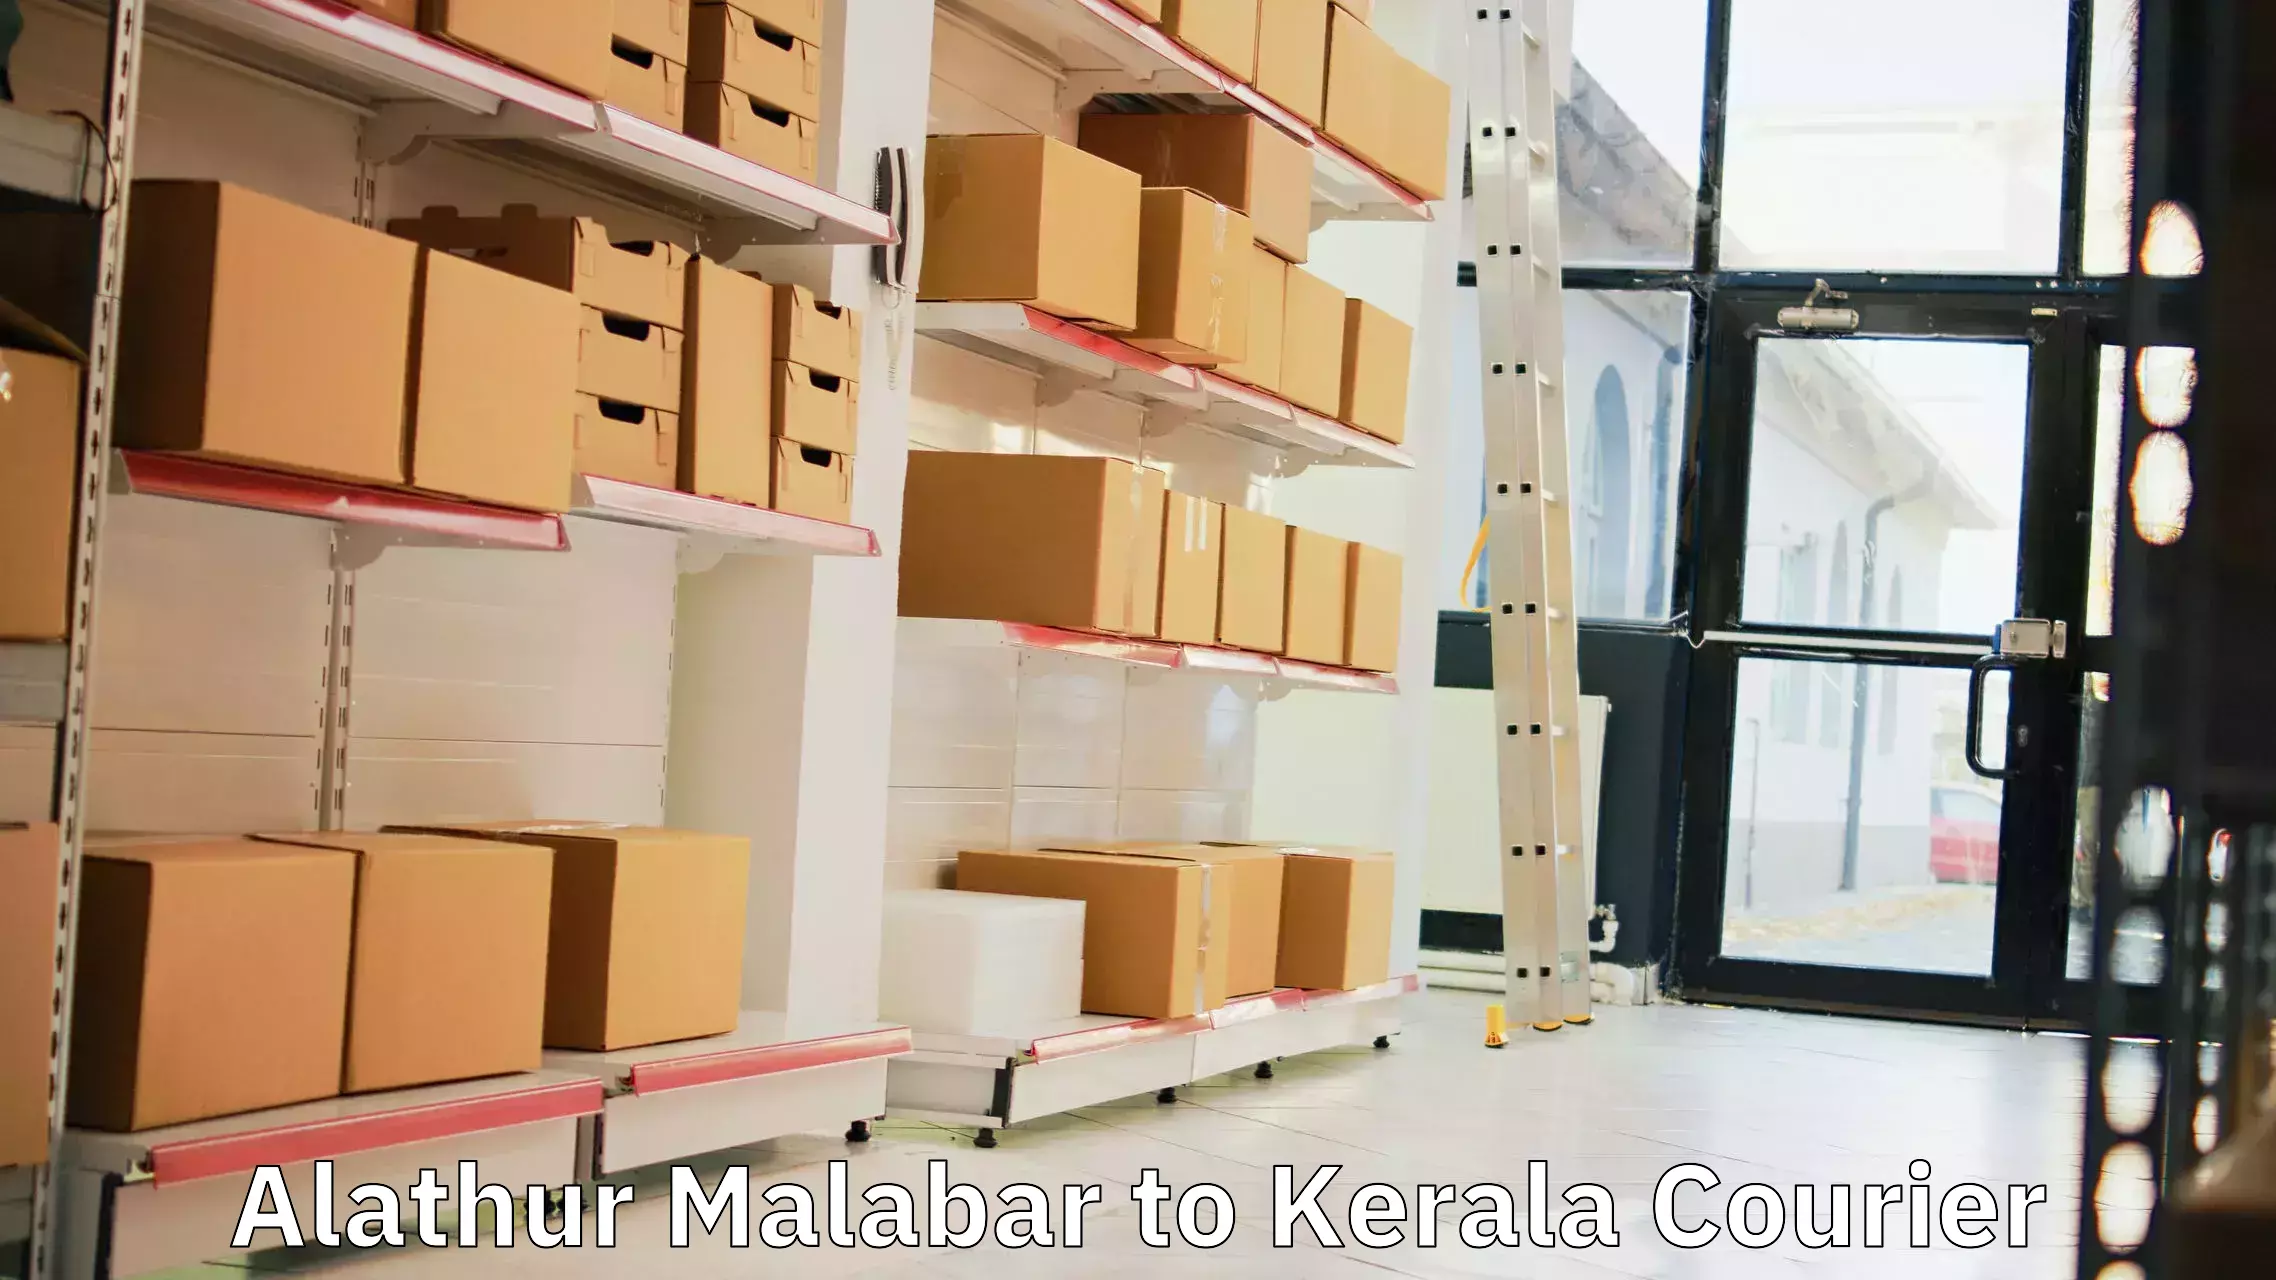 24-hour delivery options Alathur Malabar to Kollam